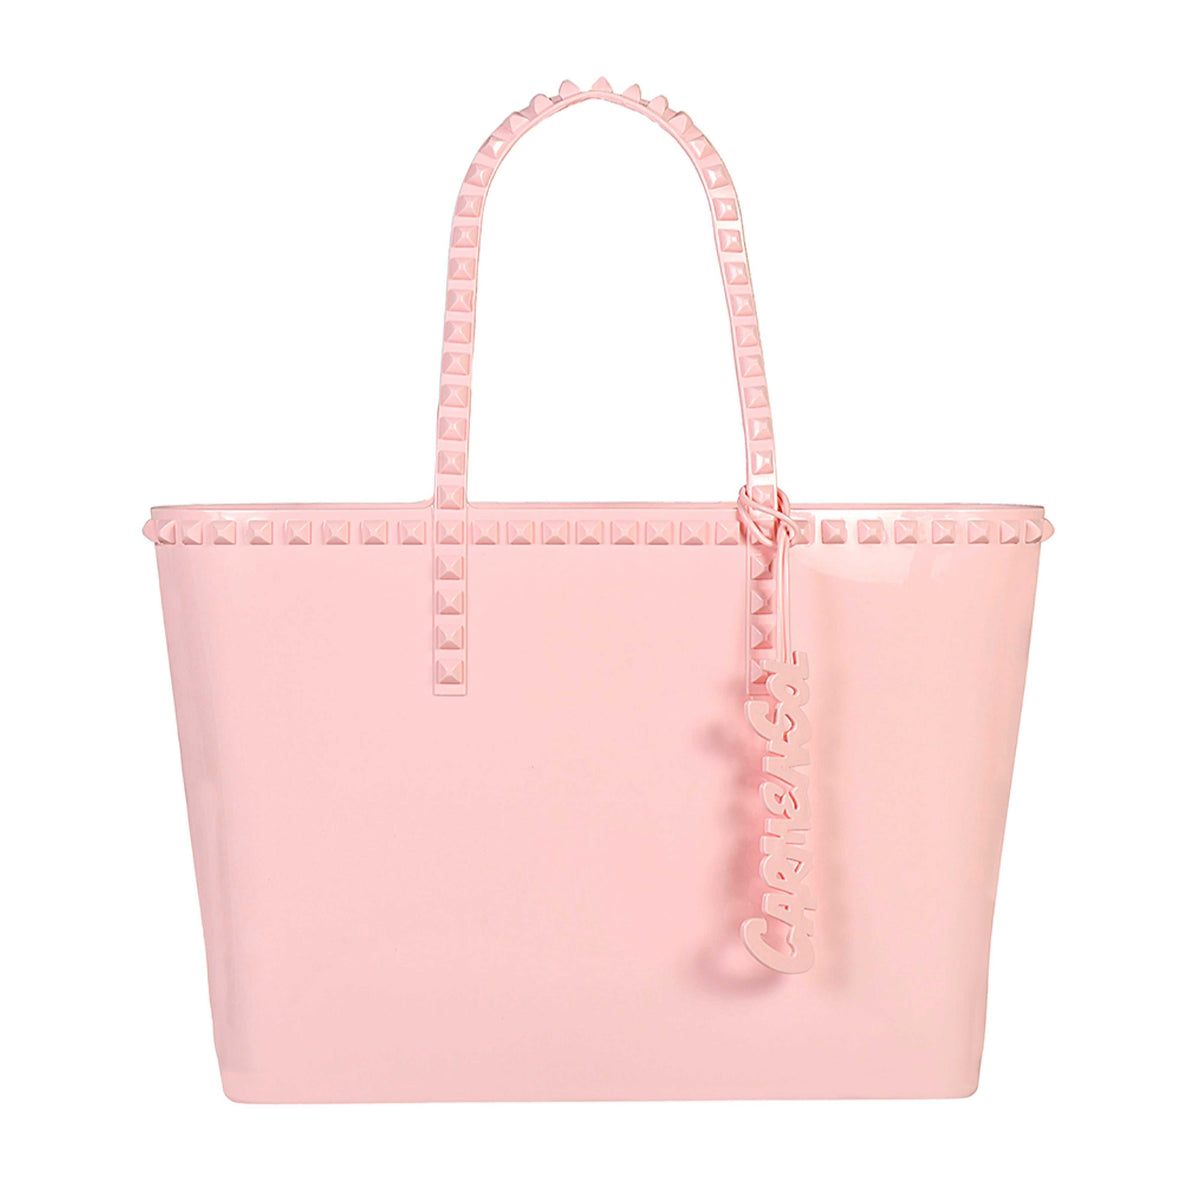 Carmen Sol studded big purse in color baby pink